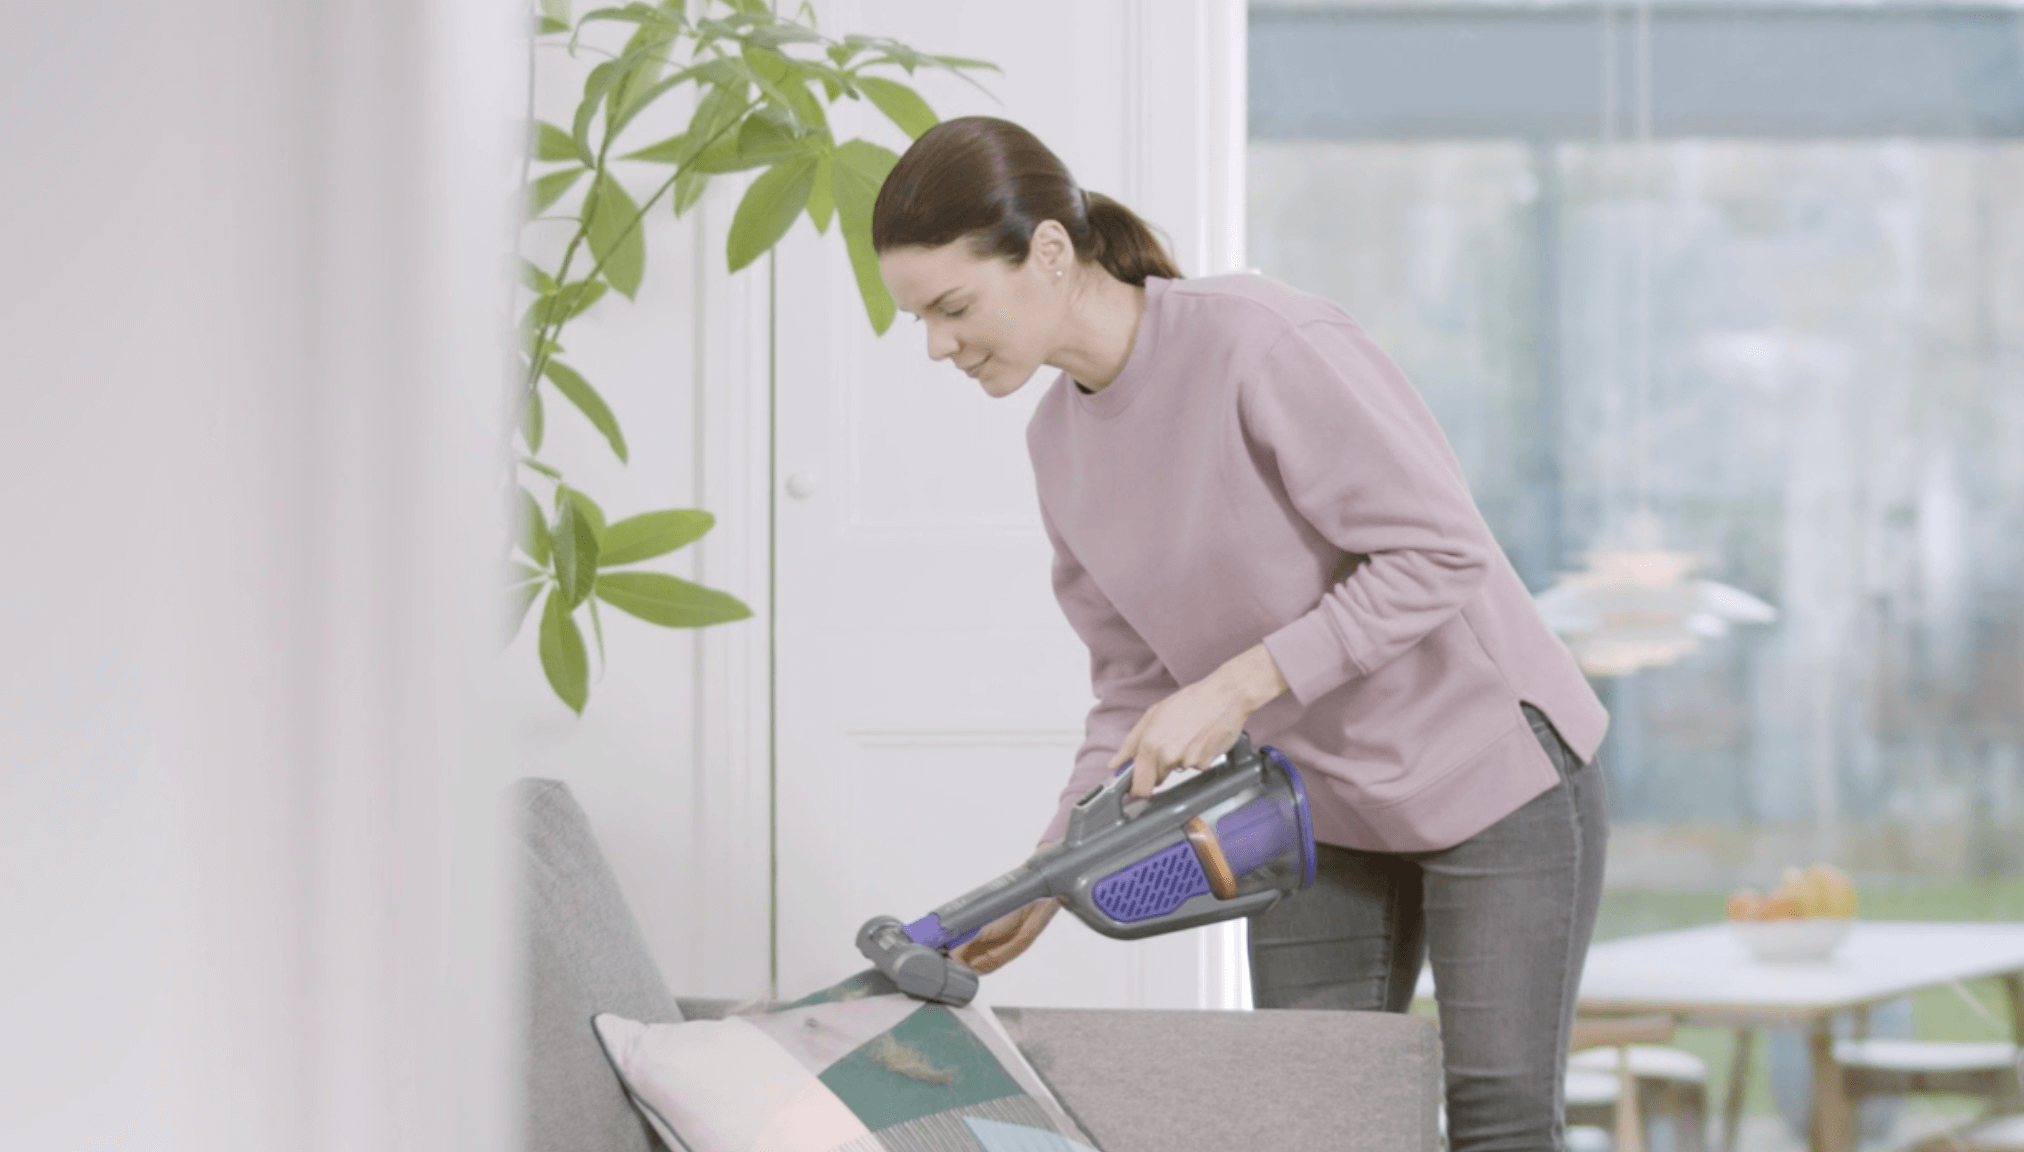 Woman vacuuming couch with handheld vacuum